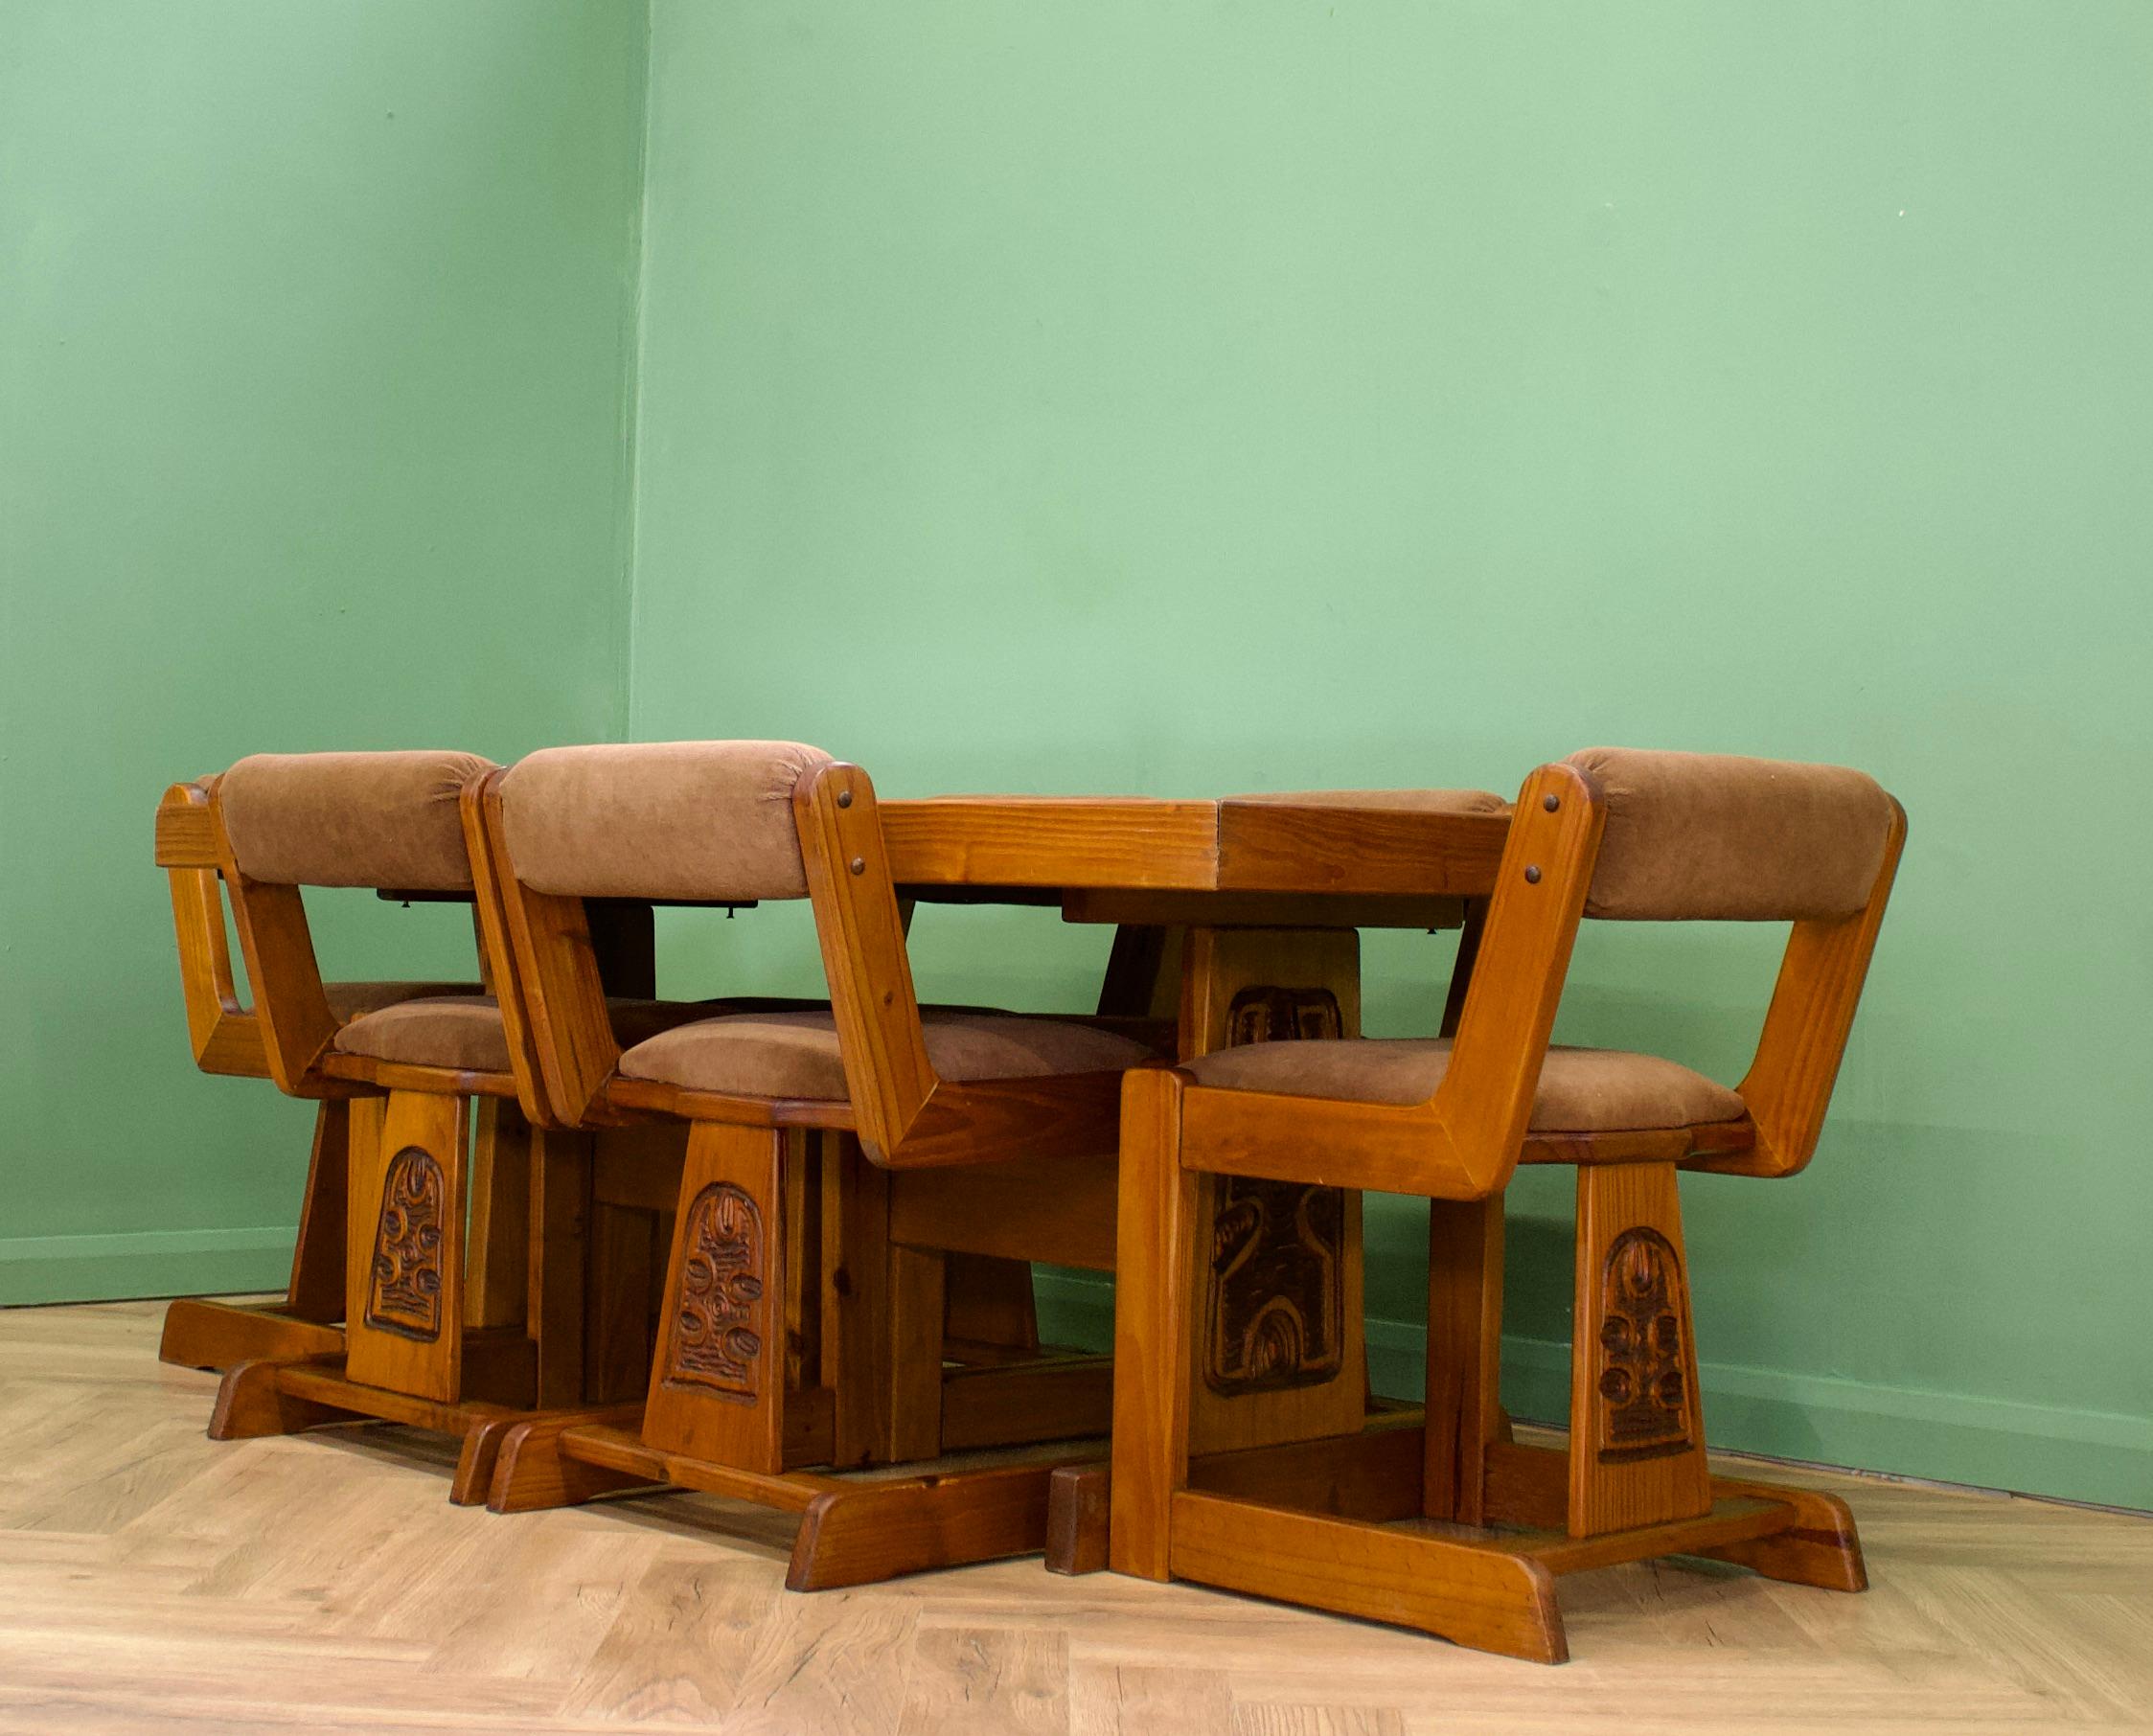 south african yellow wood furniture